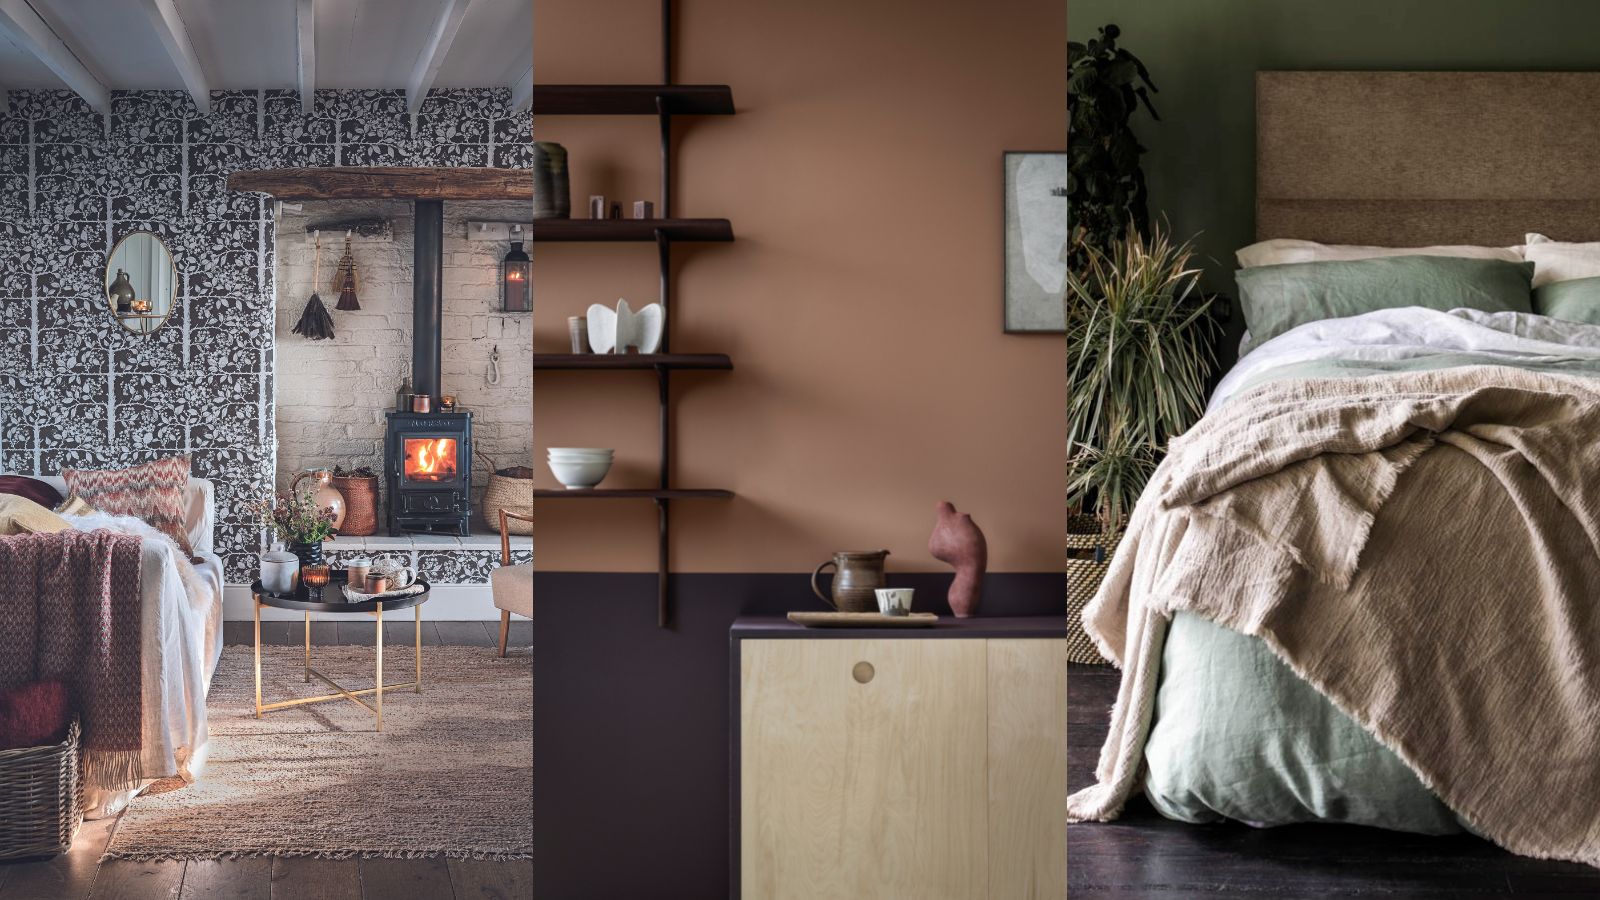 7 Easy Tips for Making Your Home Cosy - BUILD Magazine